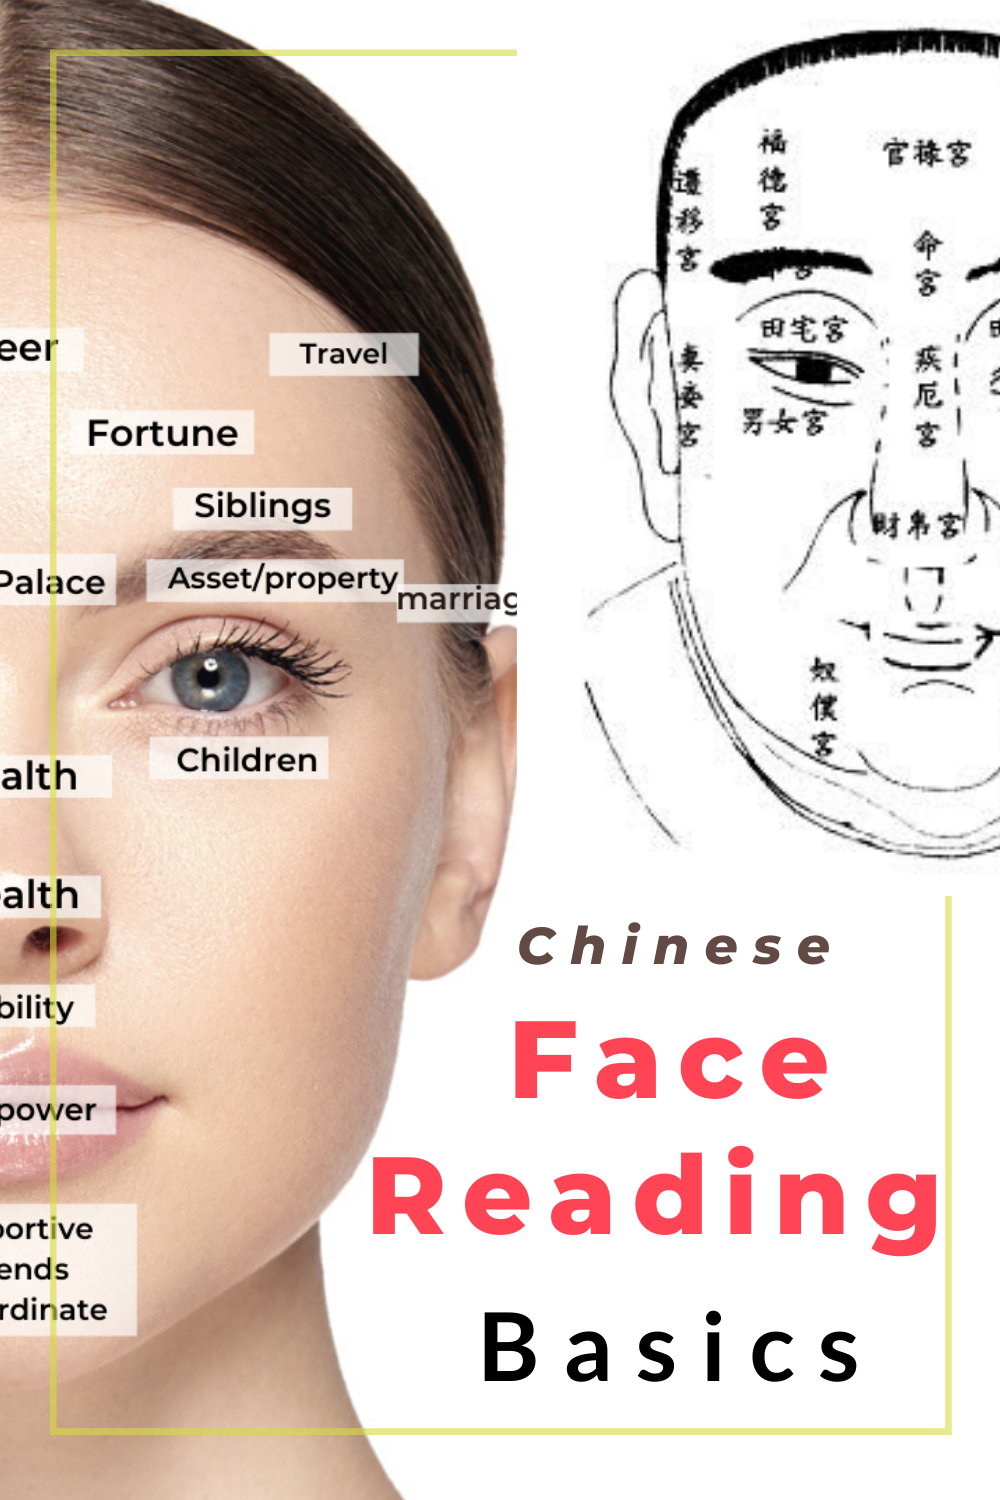 Swoosh Meaning, Learn Chinese Face Reading